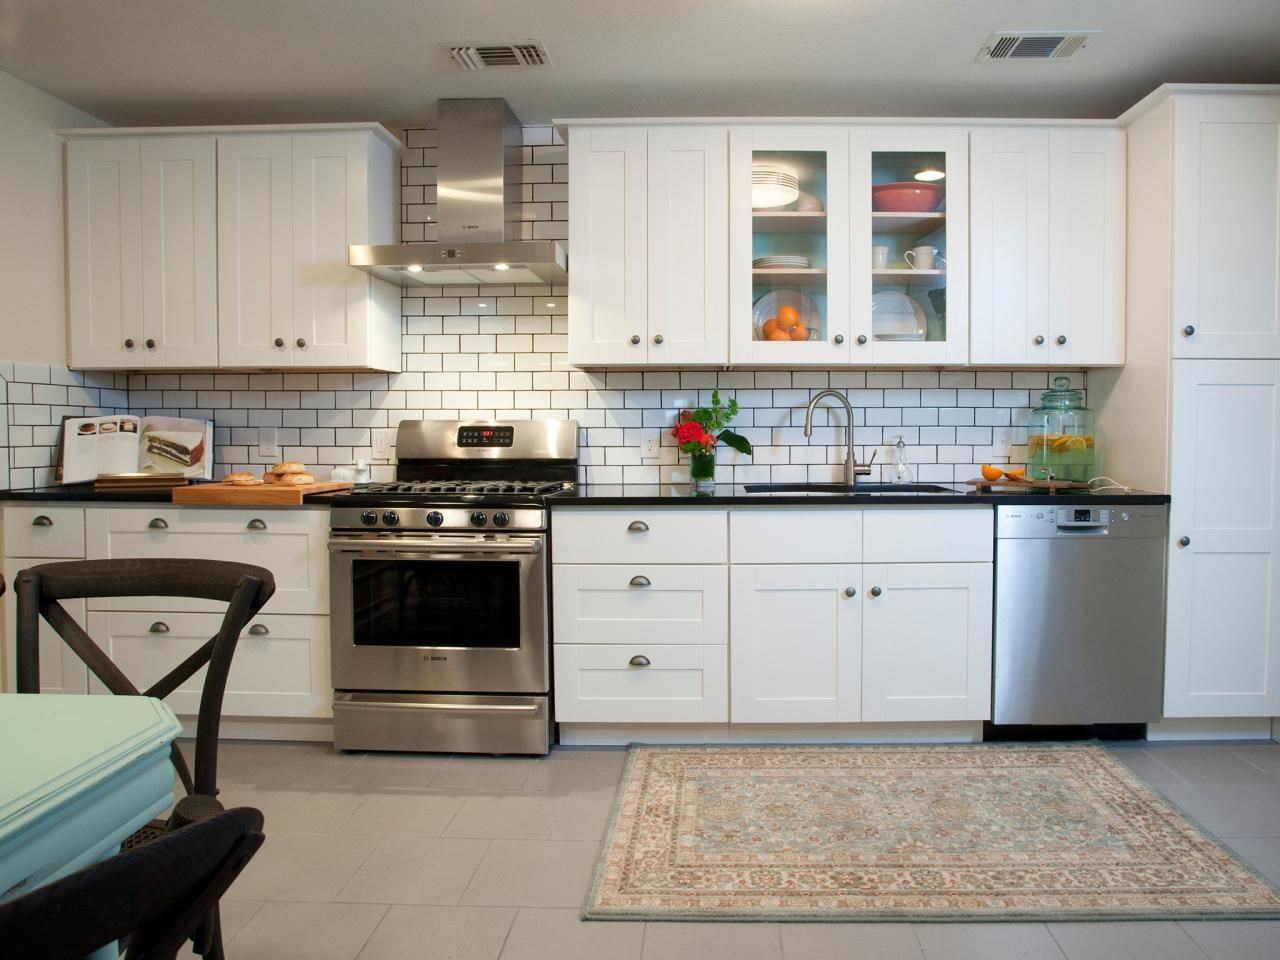 Kitchen Subway Tile
 Dress Your Kitchen In Style With Some White Subway Tiles